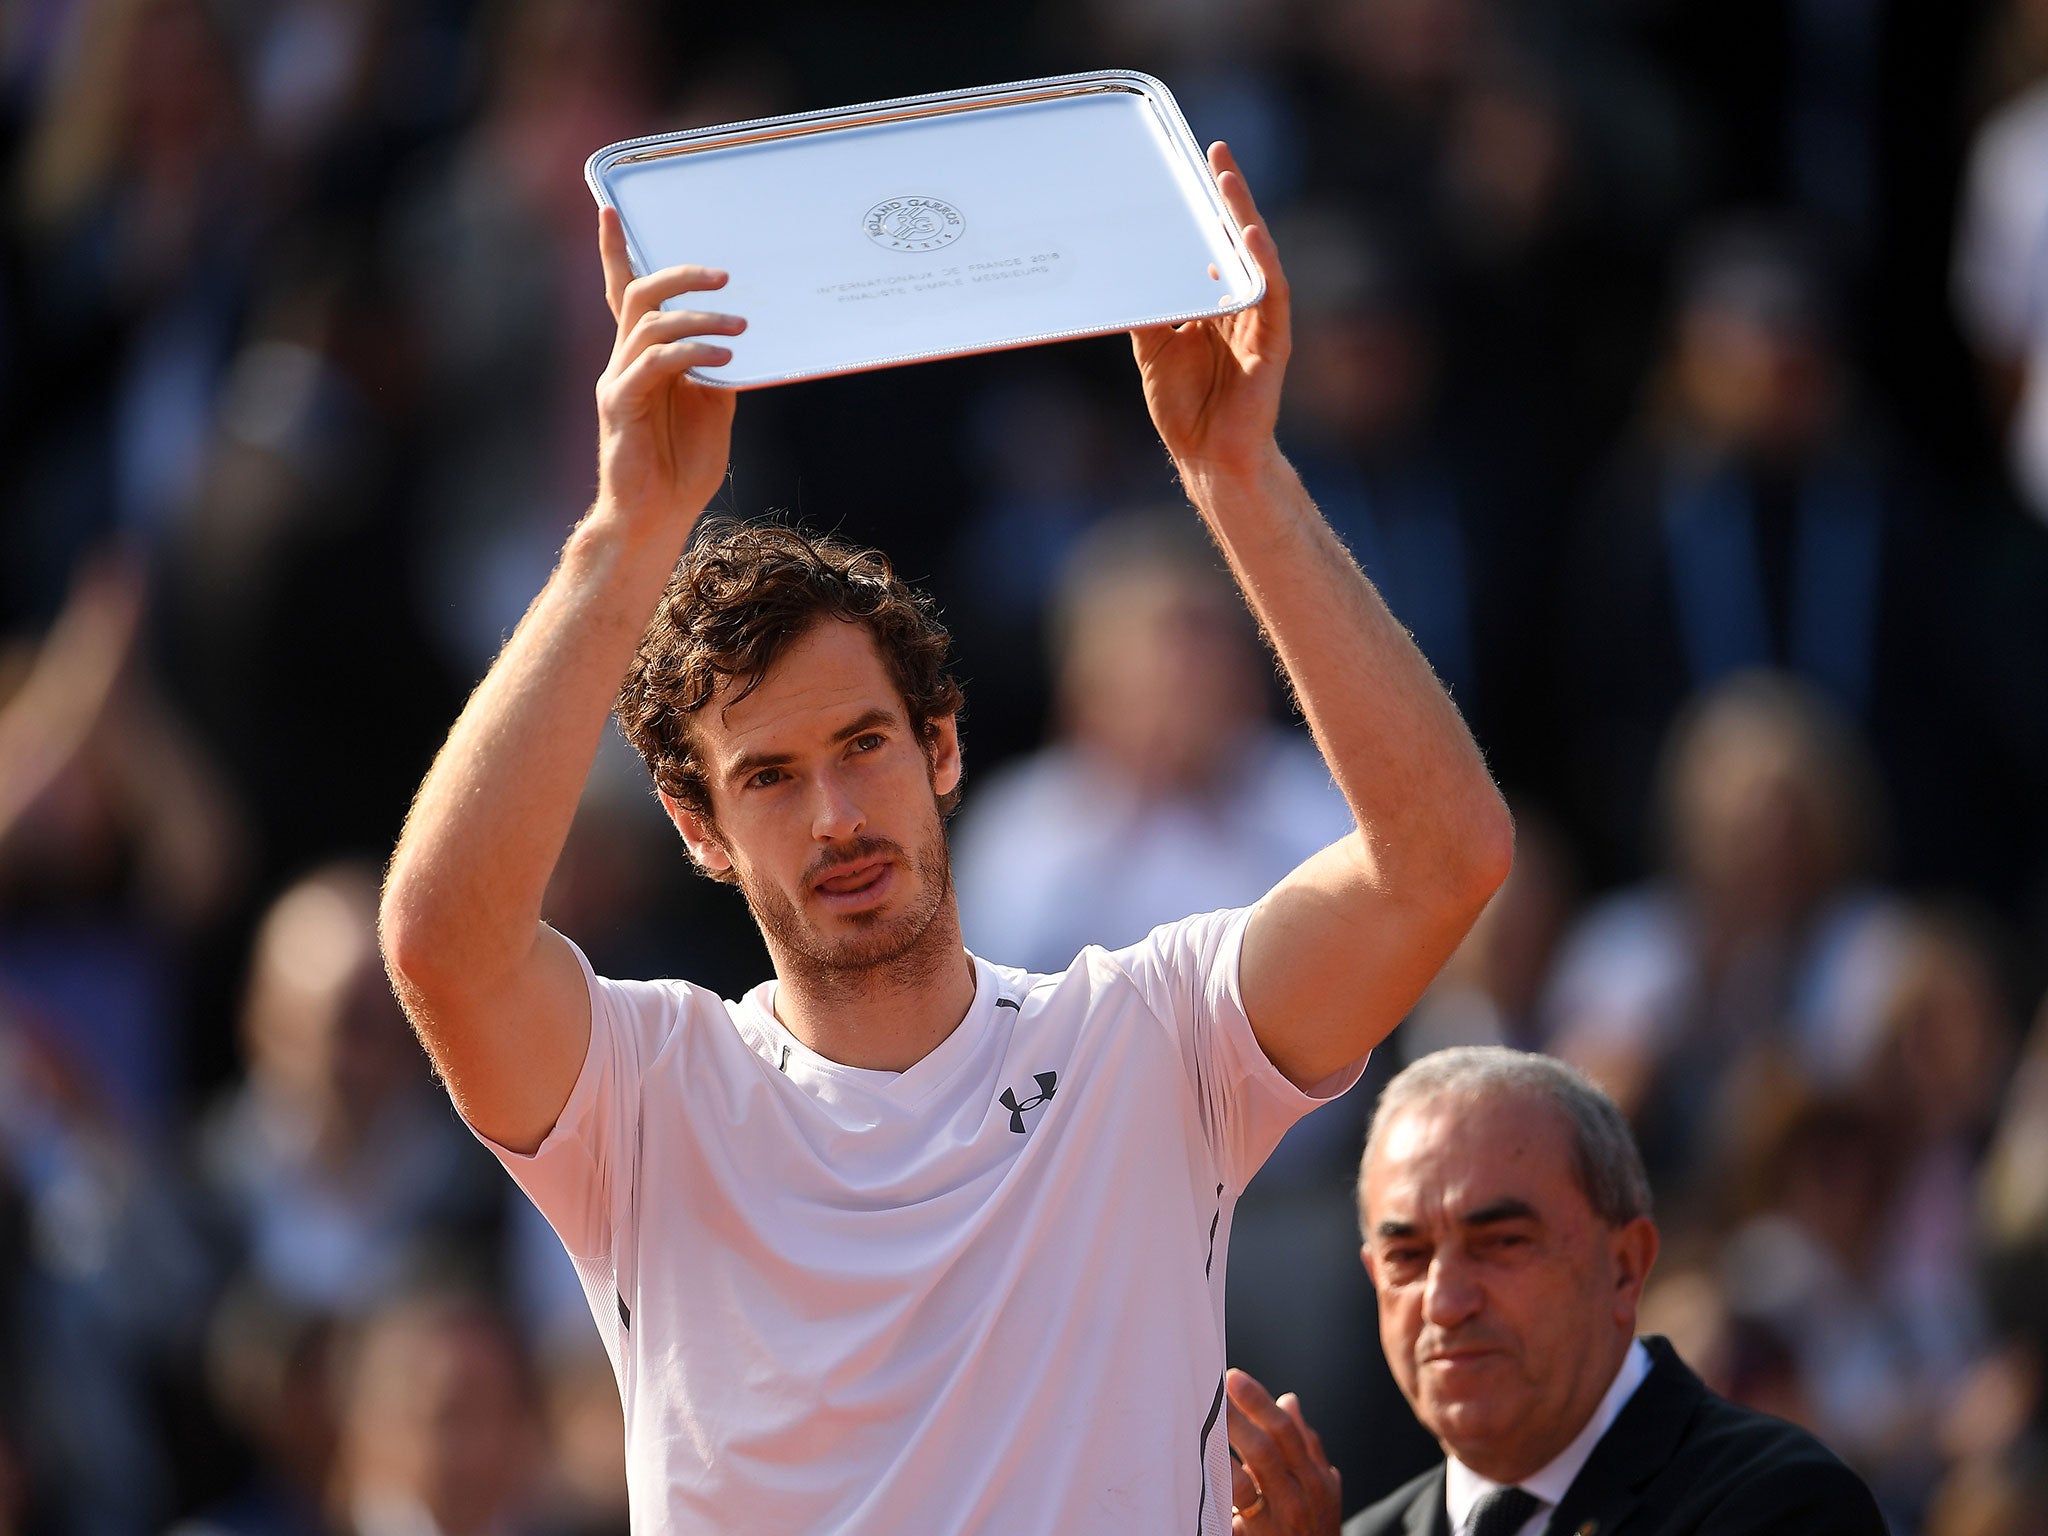 Andy Murray with his runner up prize